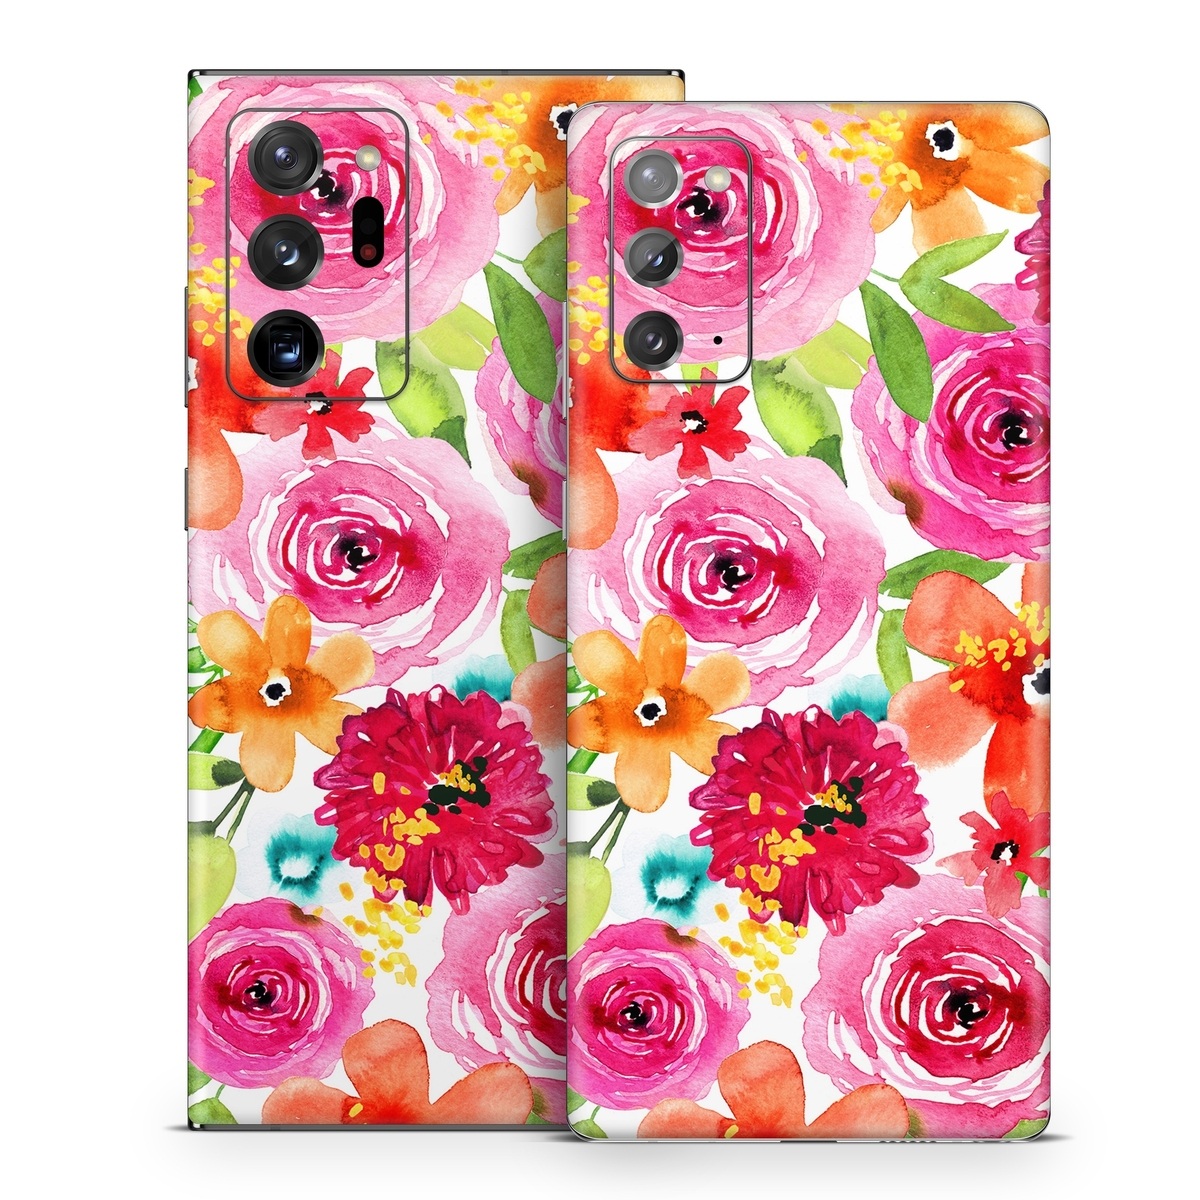 Samsung Galaxy Note 20 Series Skin design of Flower, Cut flowers, Floral design, Plant, Pink, Bouquet, Petal, Flower Arranging, Artificial flower, Clip art, with pink, red, green, orange, yellow, blue, white colors